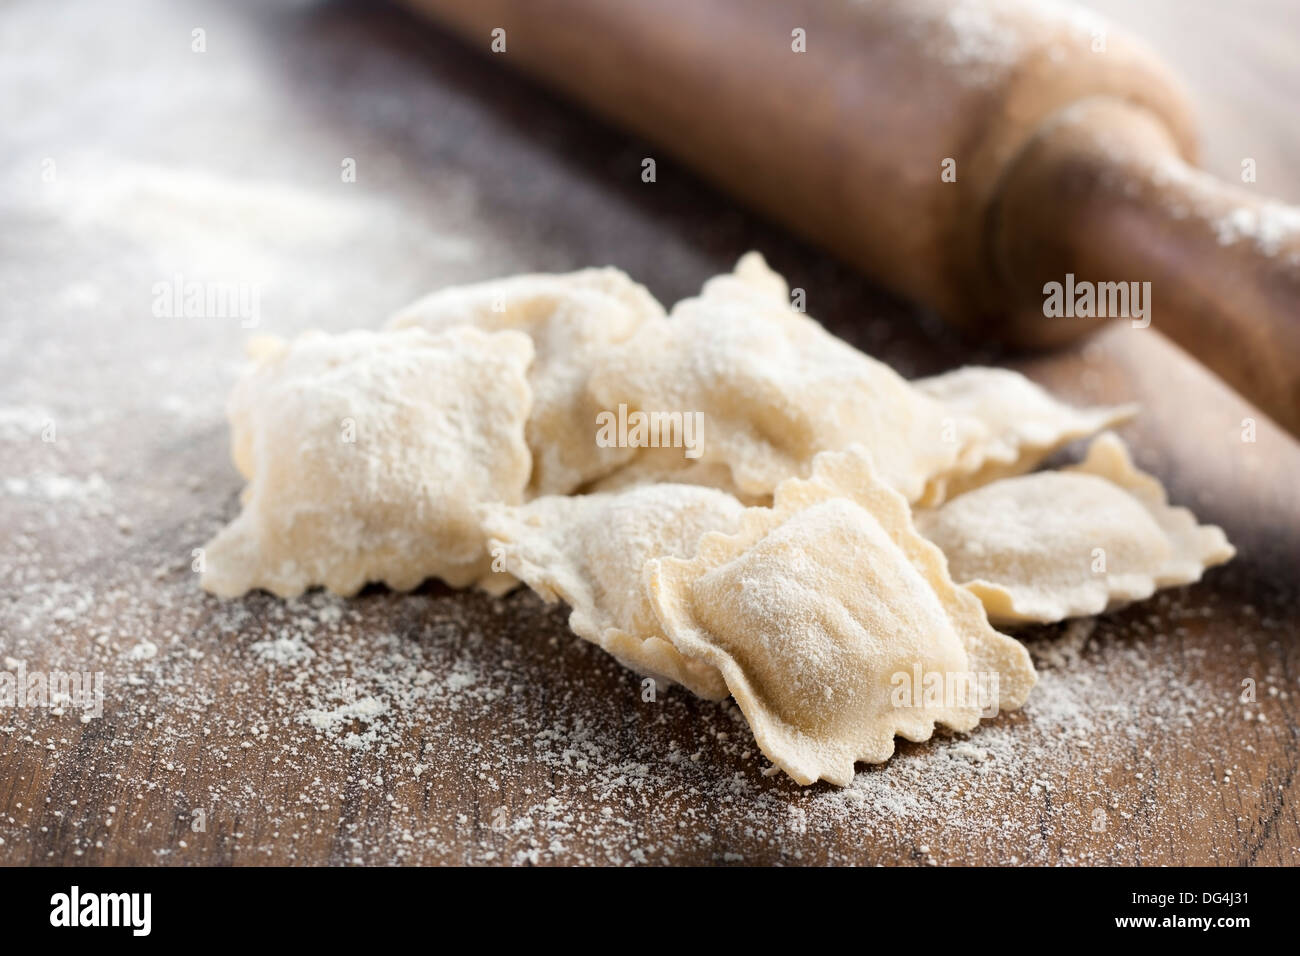 Preparing delicious homemade ravioli with a roller Stock Photo